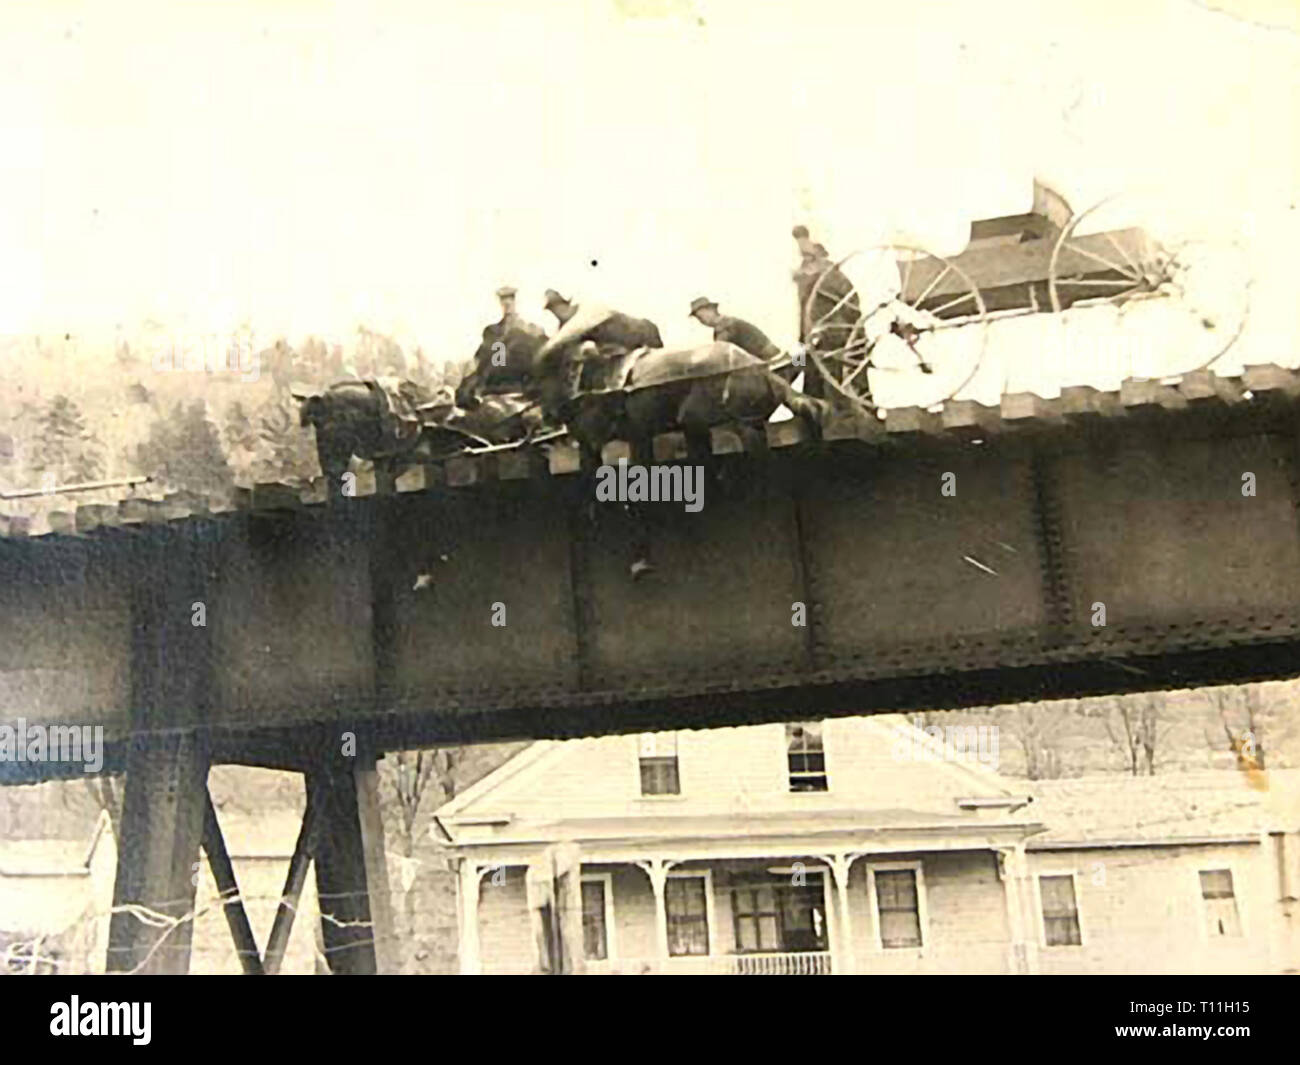 Photos of early America-Tragic event of horses getting stuck on a New England railroad bridge. Stock Photo